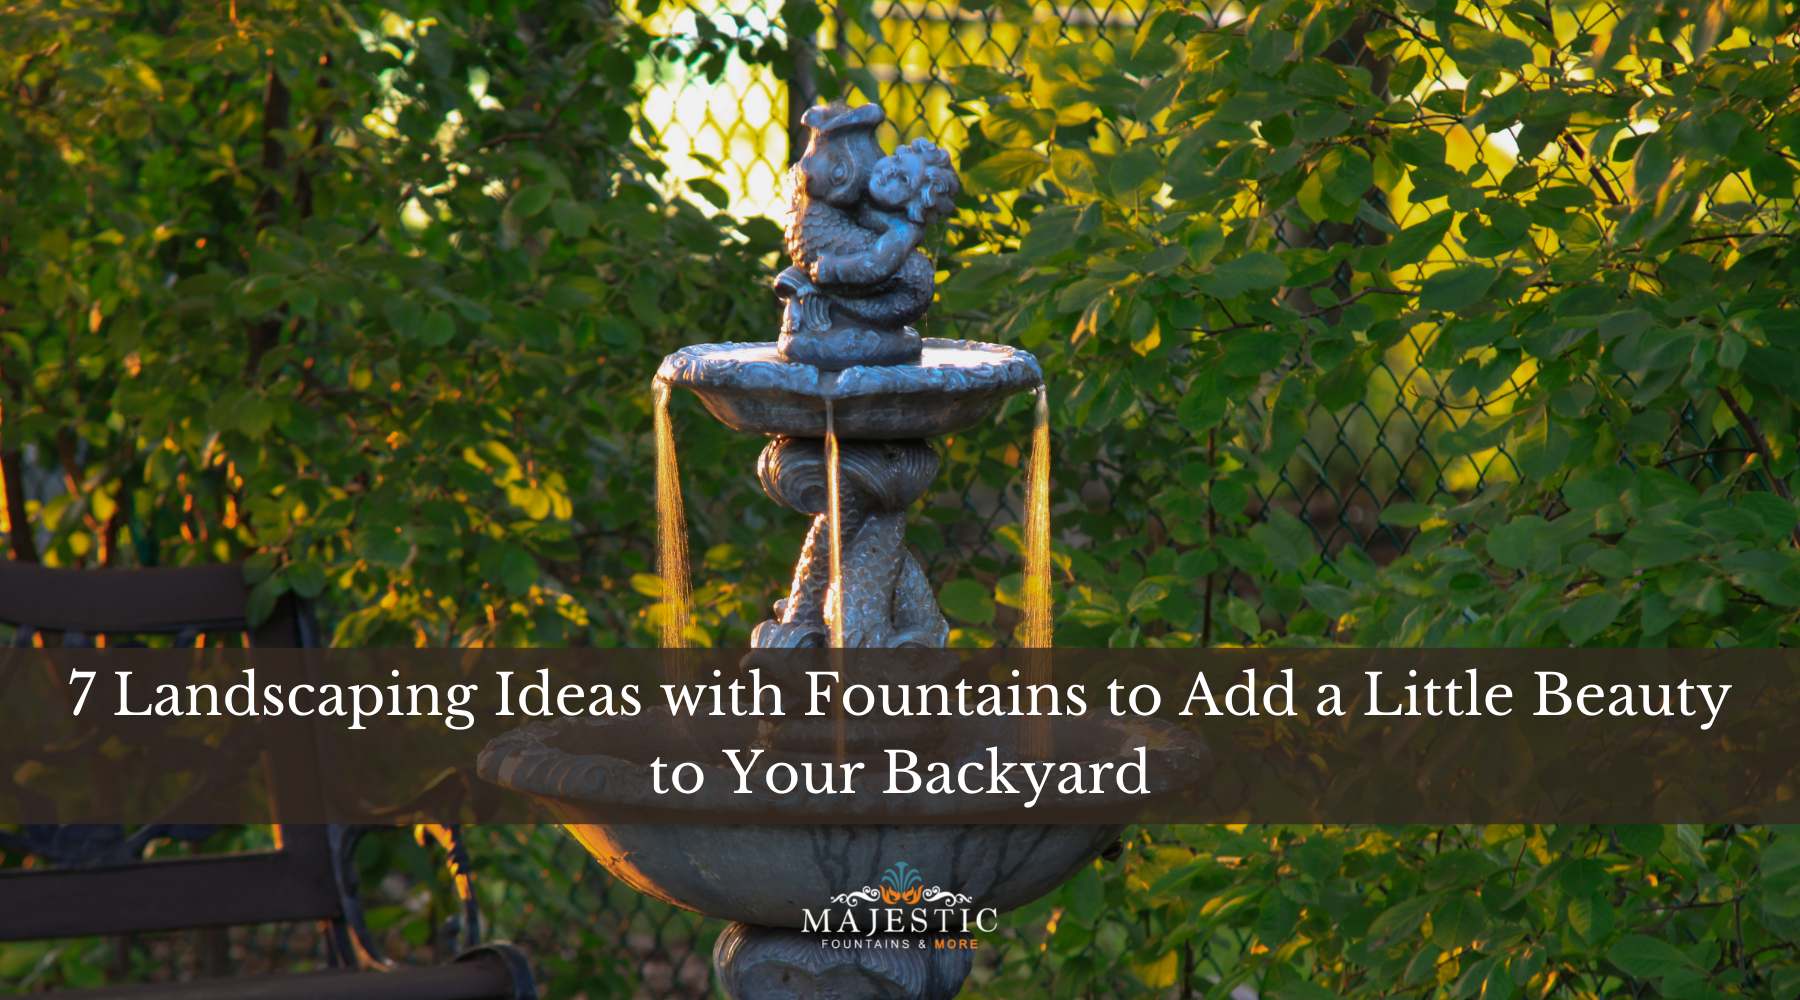 7 Landscaping Ideas with Fountains to Add a Little Beauty to Your Backyard - Majestic Fountains and More